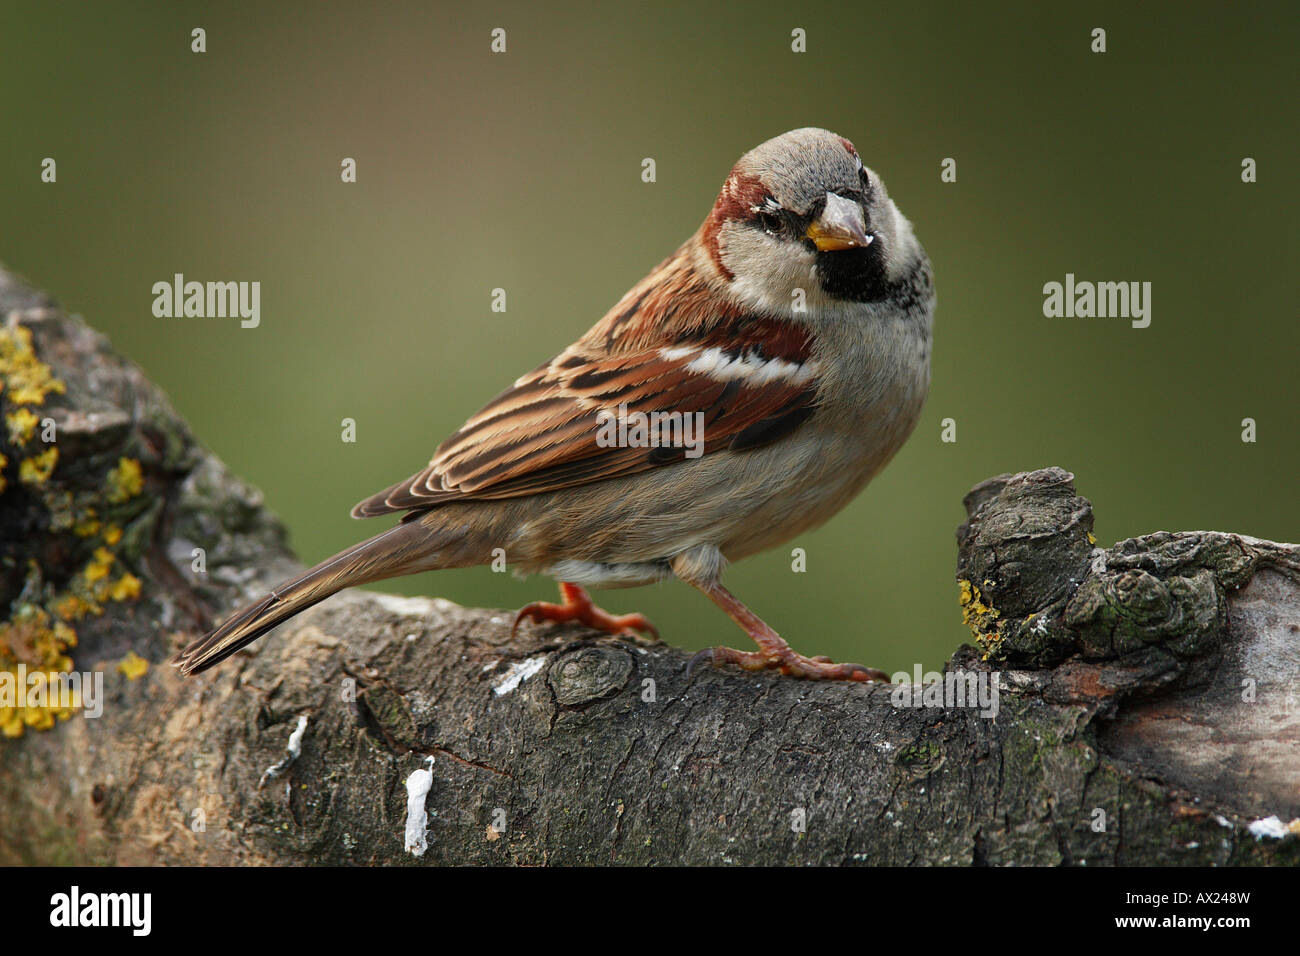 House Sparrow or English Sparrow (Passer domesticus) Stock Photo